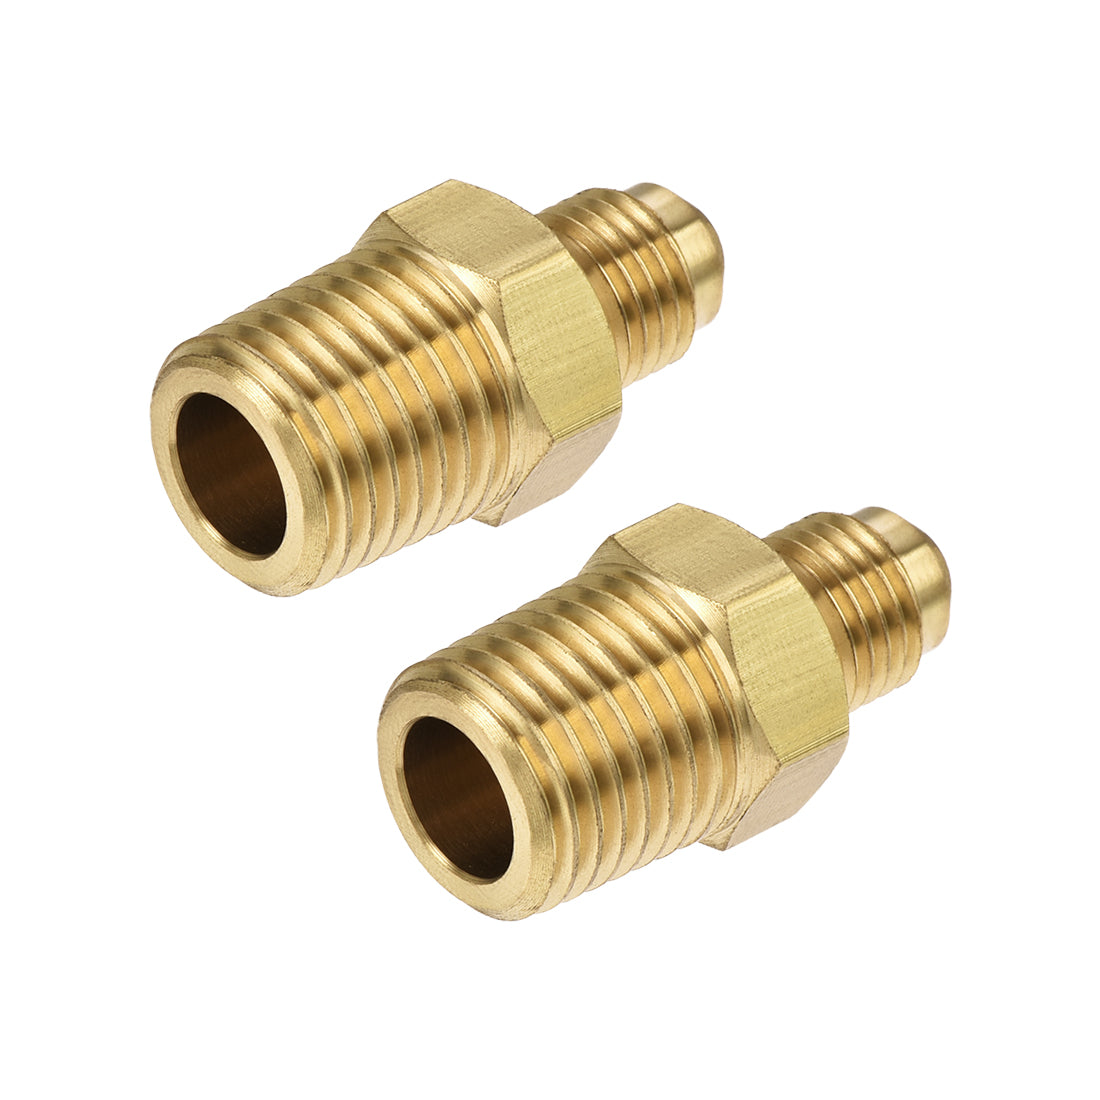 Uxcell Uxcell Brass Pipe Fitting, 3/16 SAE Flare Male to 1/4NPT Male Thread, Tubing Adapter Hose Connector, for Air Conditioner Refrigeration, 2Pcs